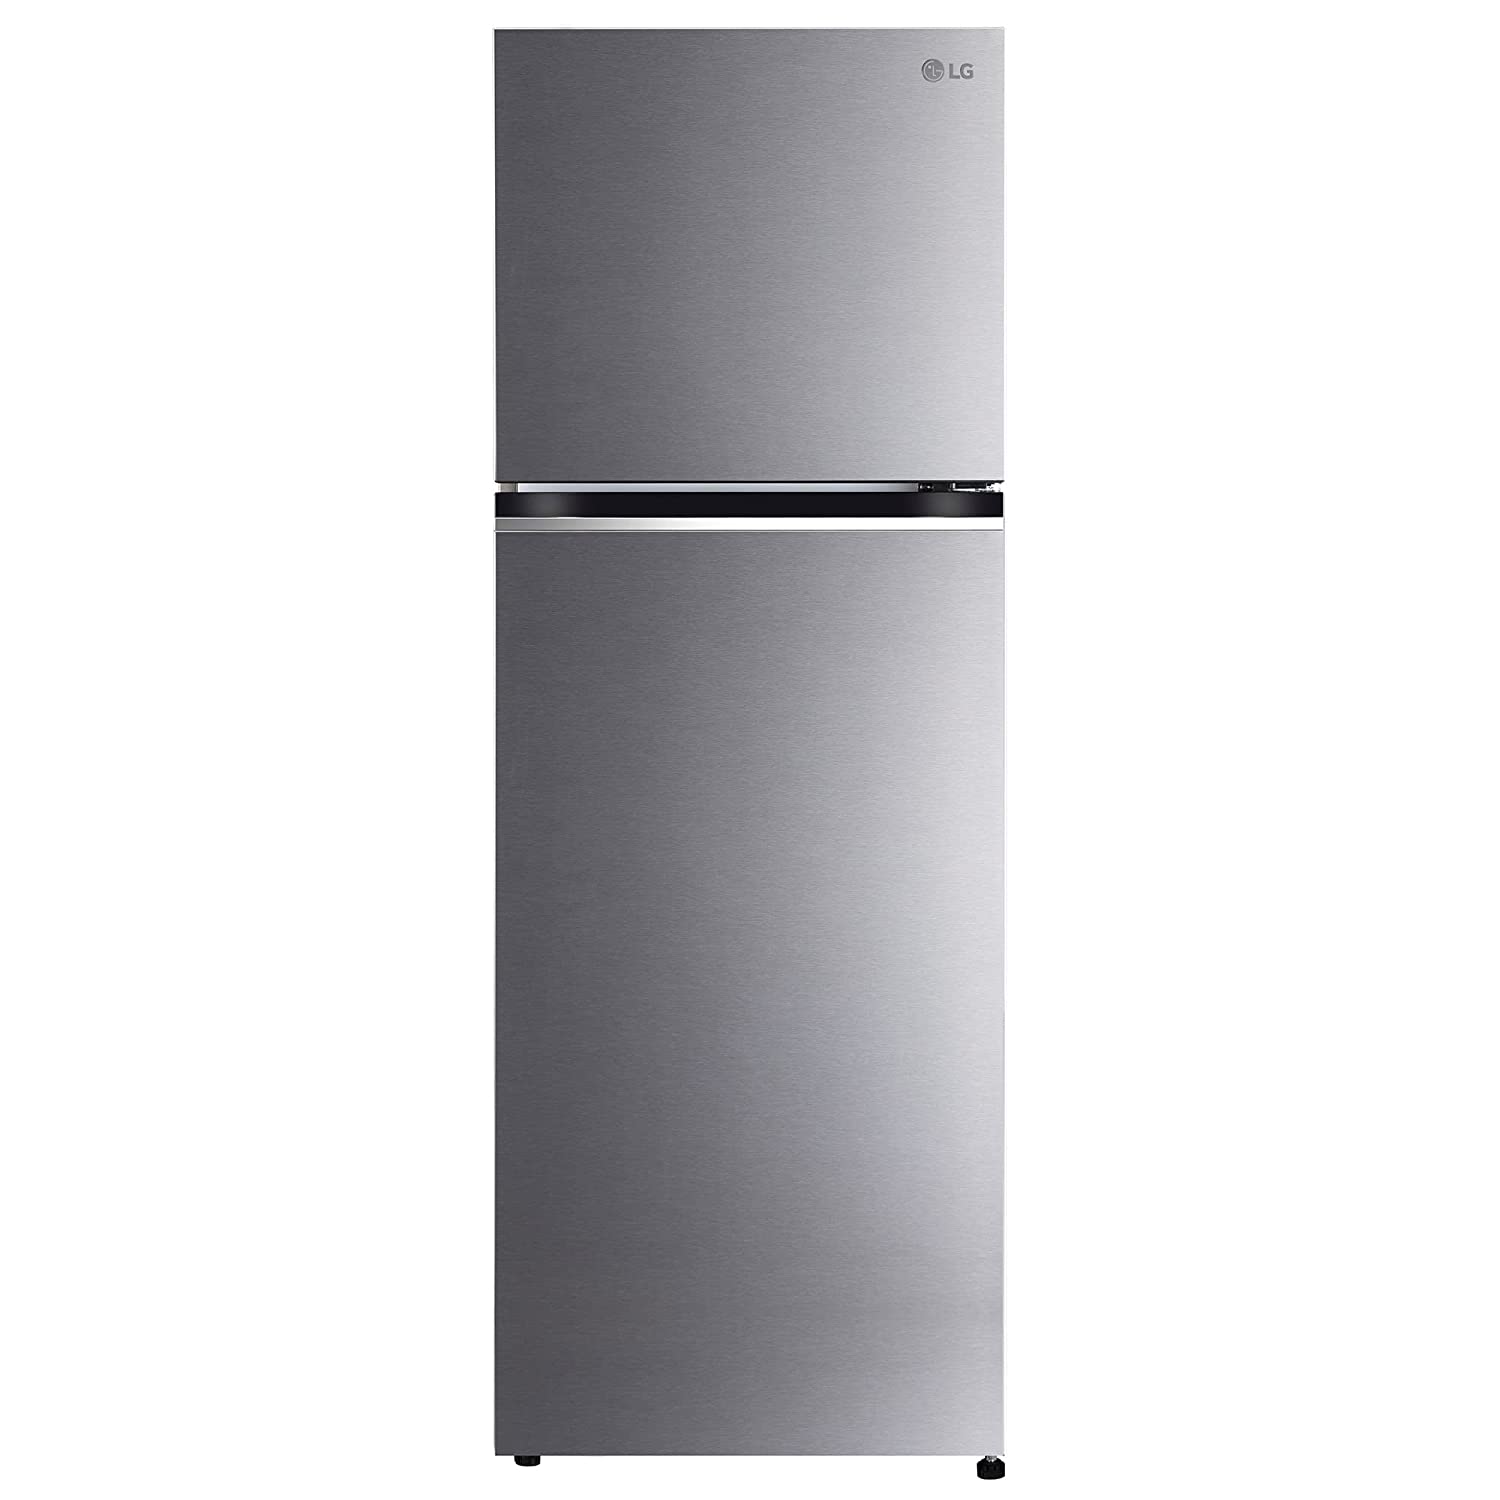 The Ultimate Guide to LG Double Door Refrigerators: Features, Benefits, and Reviews